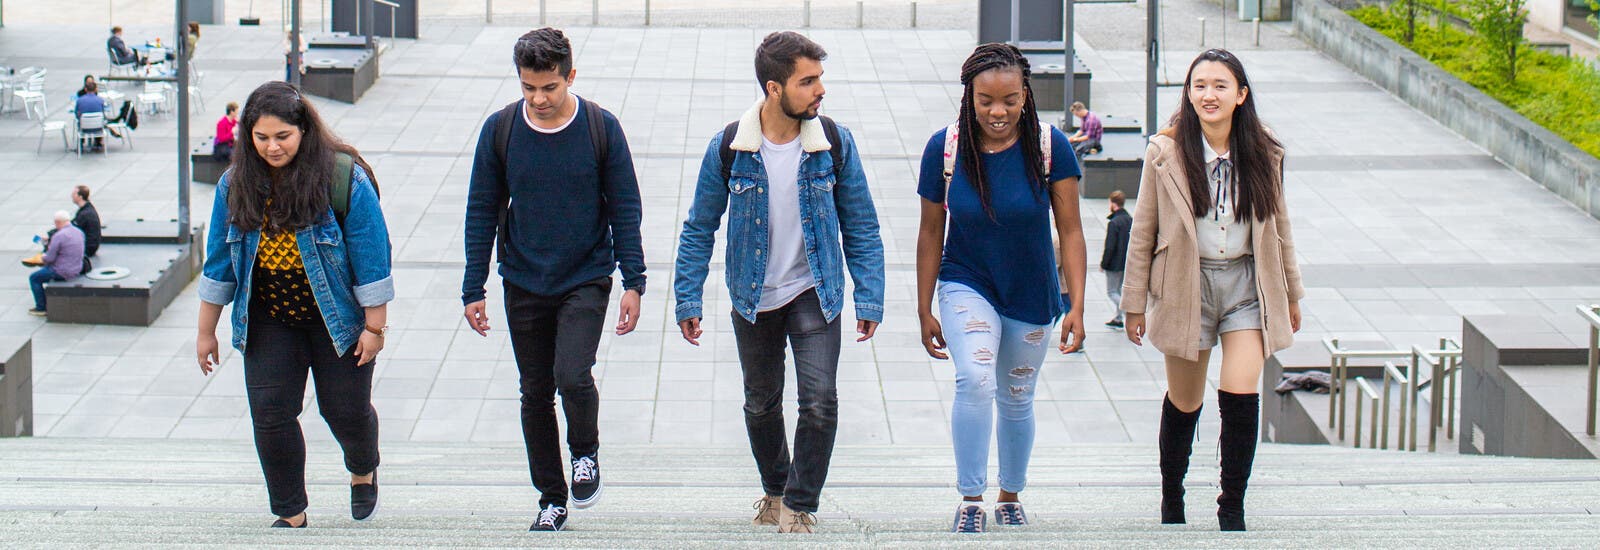 A group of students walking around Liverpool.